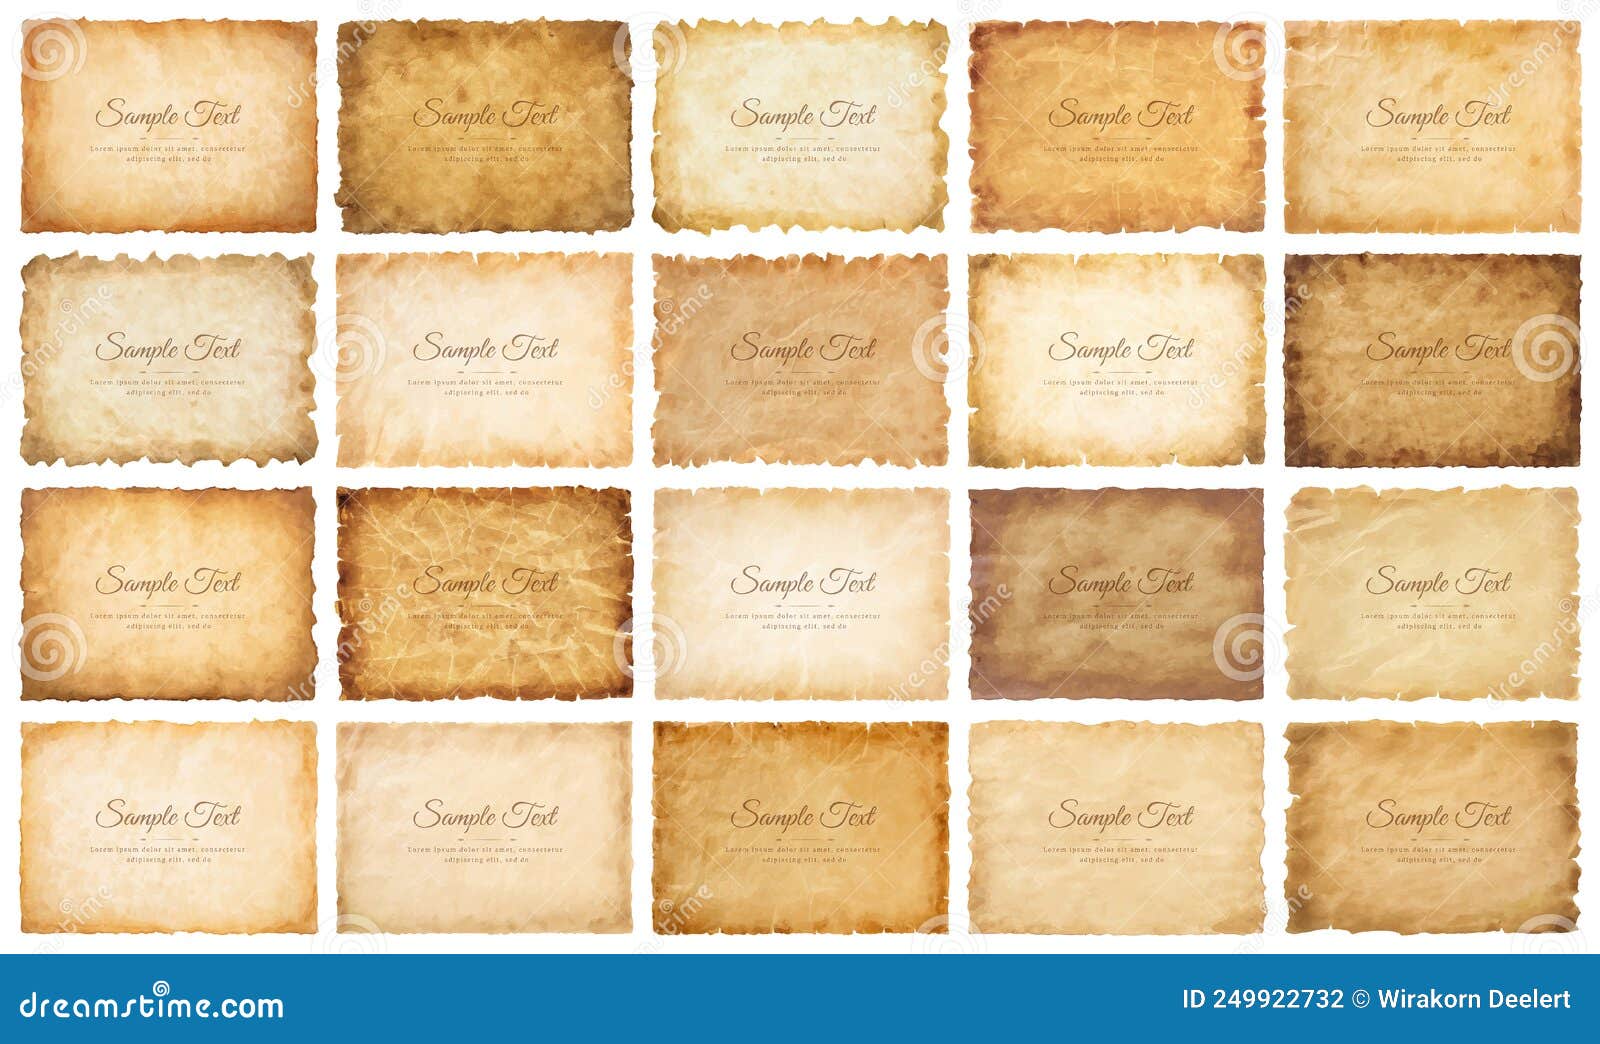 https://thumbs.dreamstime.com/z/vector-collection-set-old-parchment-paper-sheet-vintage-aged-texture-isolated-white-background-249922732.jpg